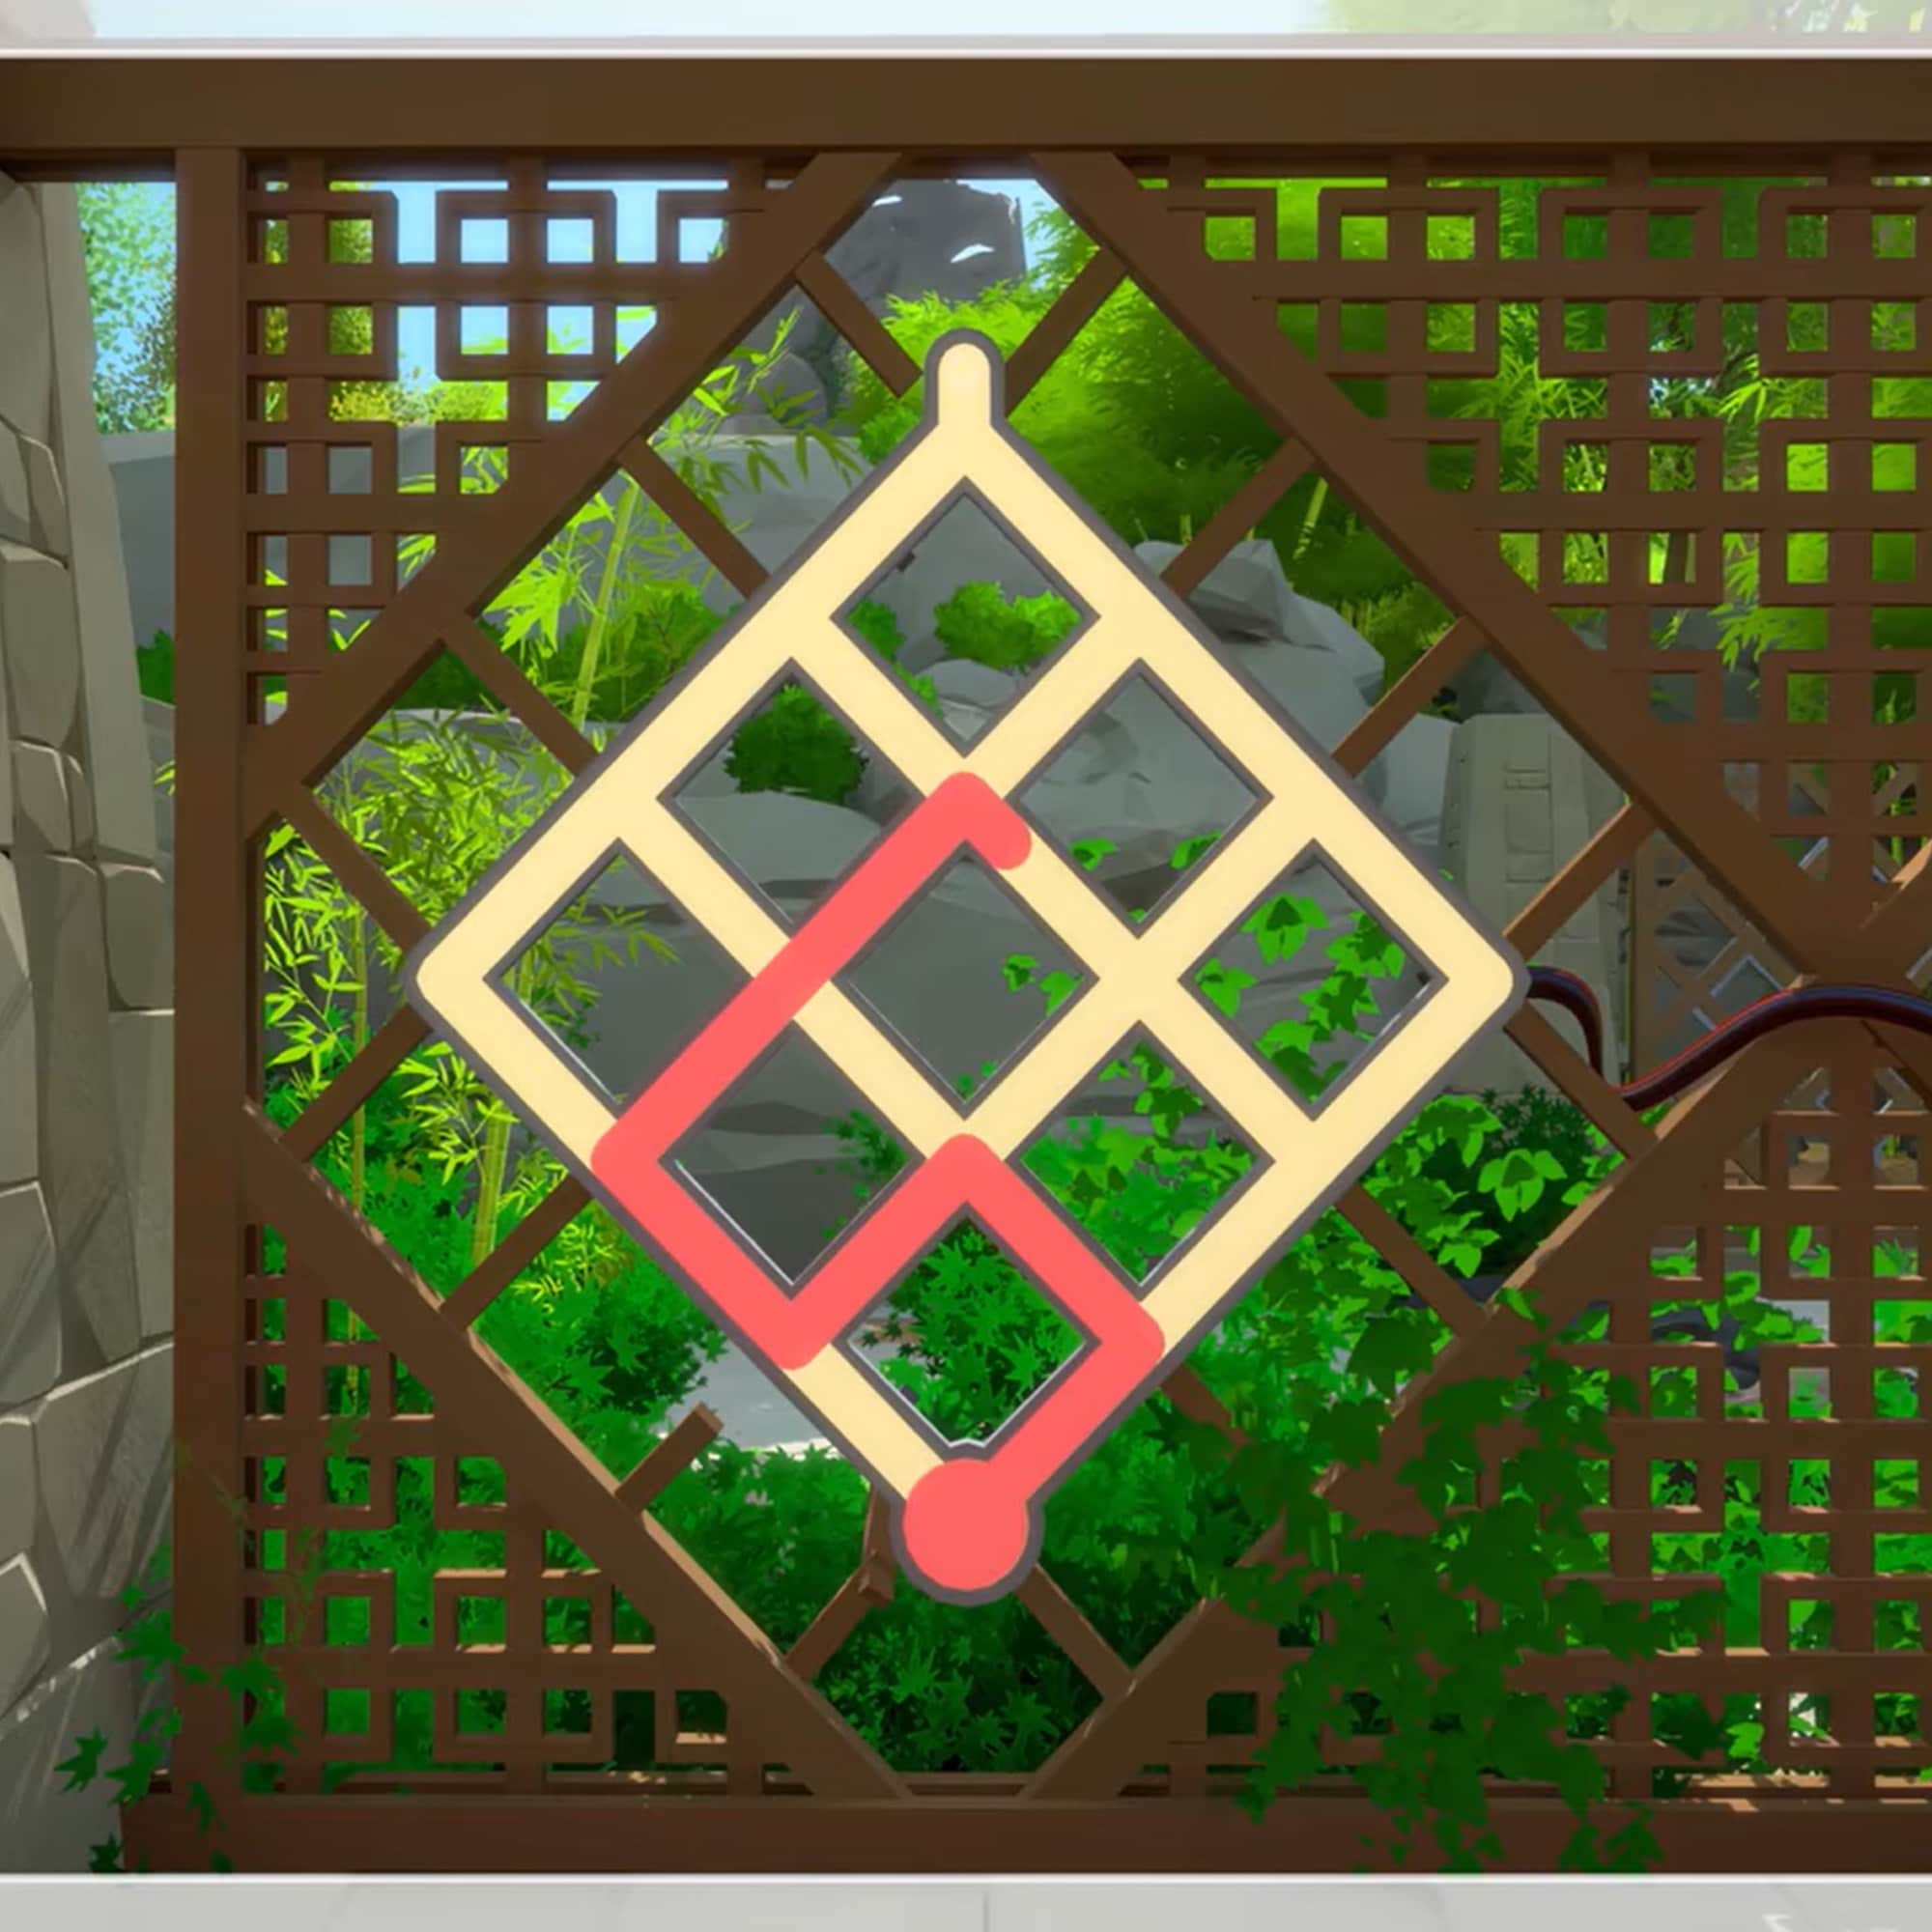 A puzzle in The Witness.